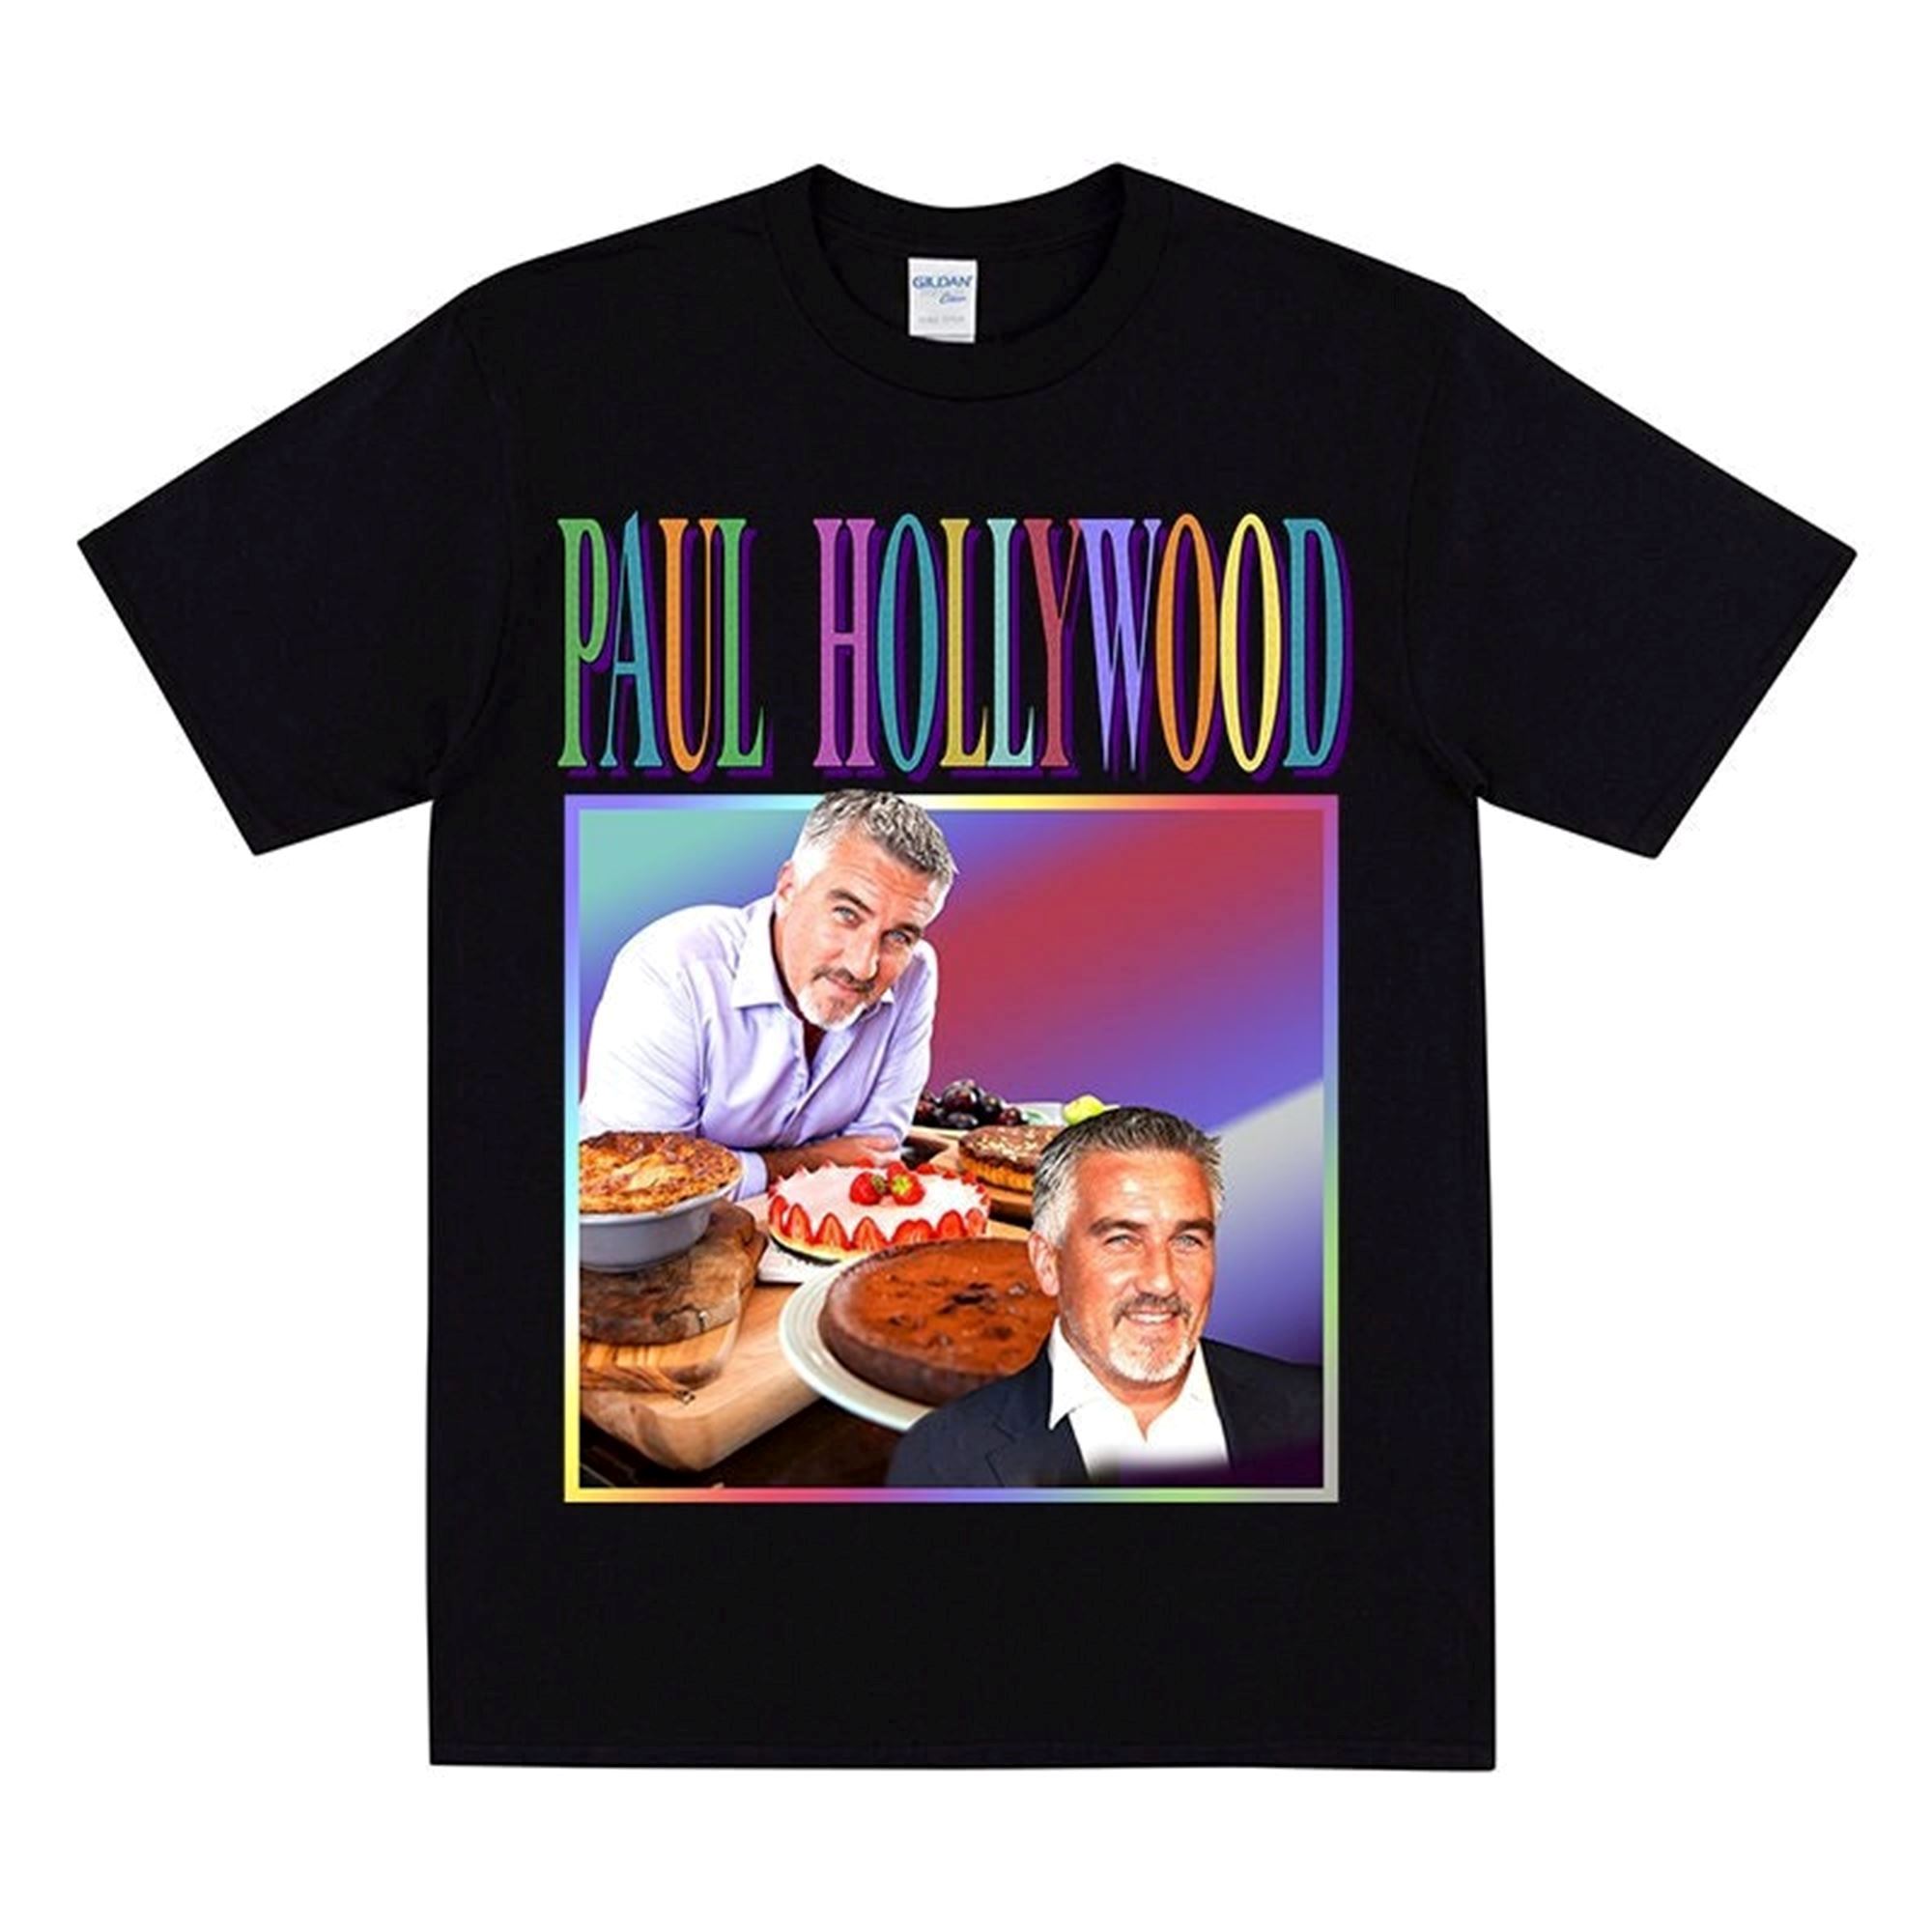 Best Paul Hollywood Homage T-shirt Funny T Shirt For Her Food Drink Inspired I Love Your Soggy Bottom Present For Foodies Xmas Gift Ideas 